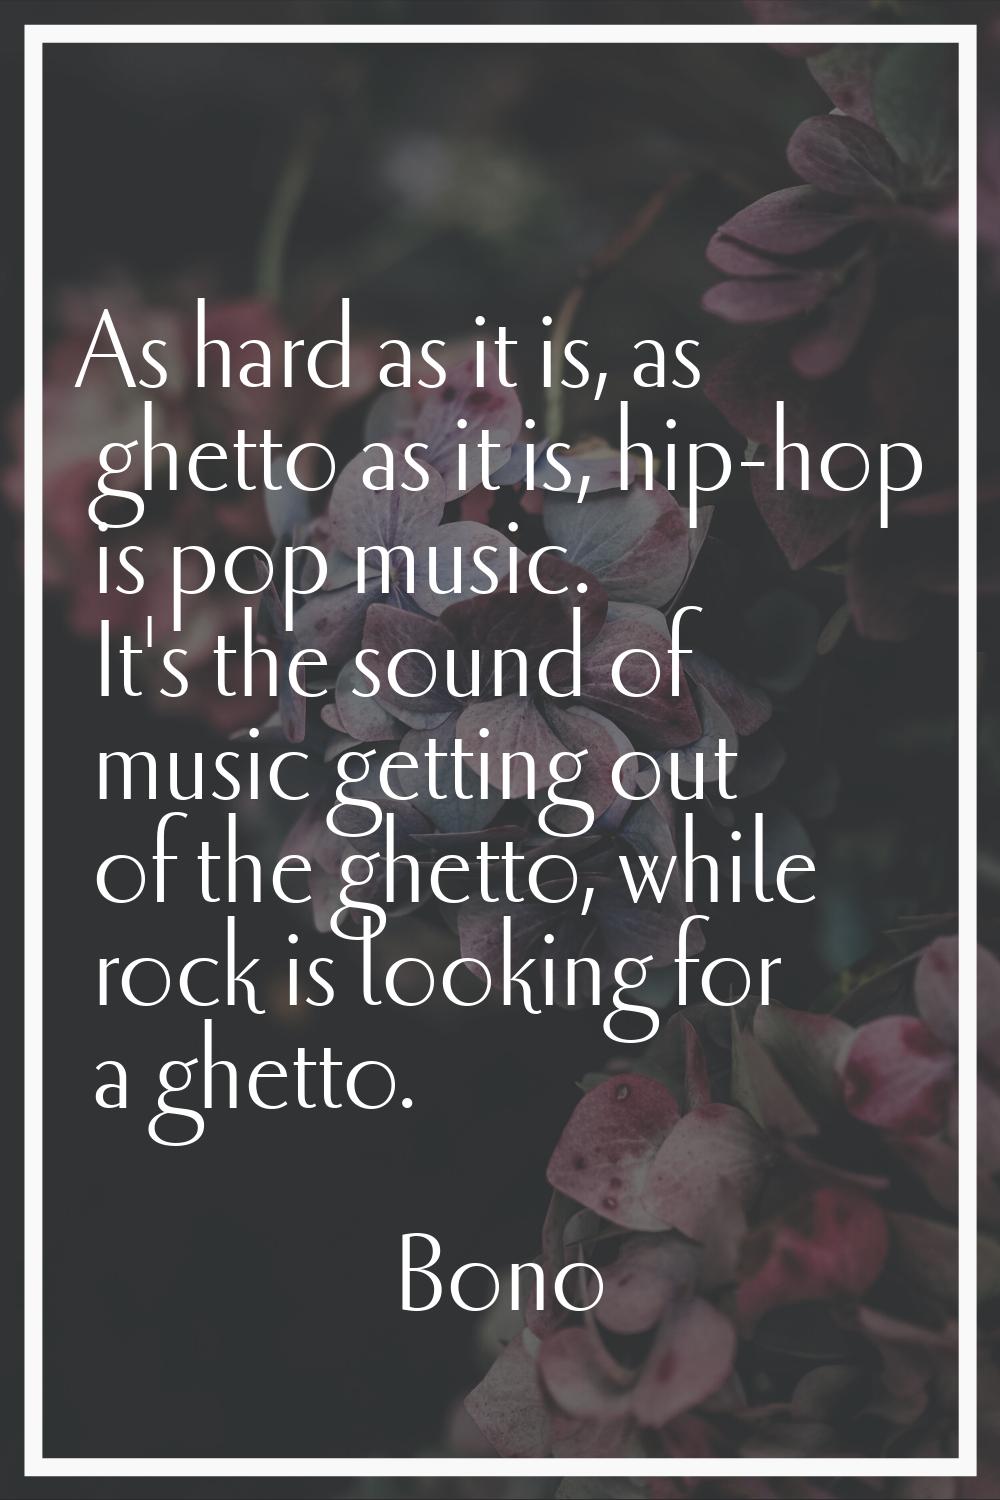 As hard as it is, as ghetto as it is, hip-hop is pop music. It's the sound of music getting out of 